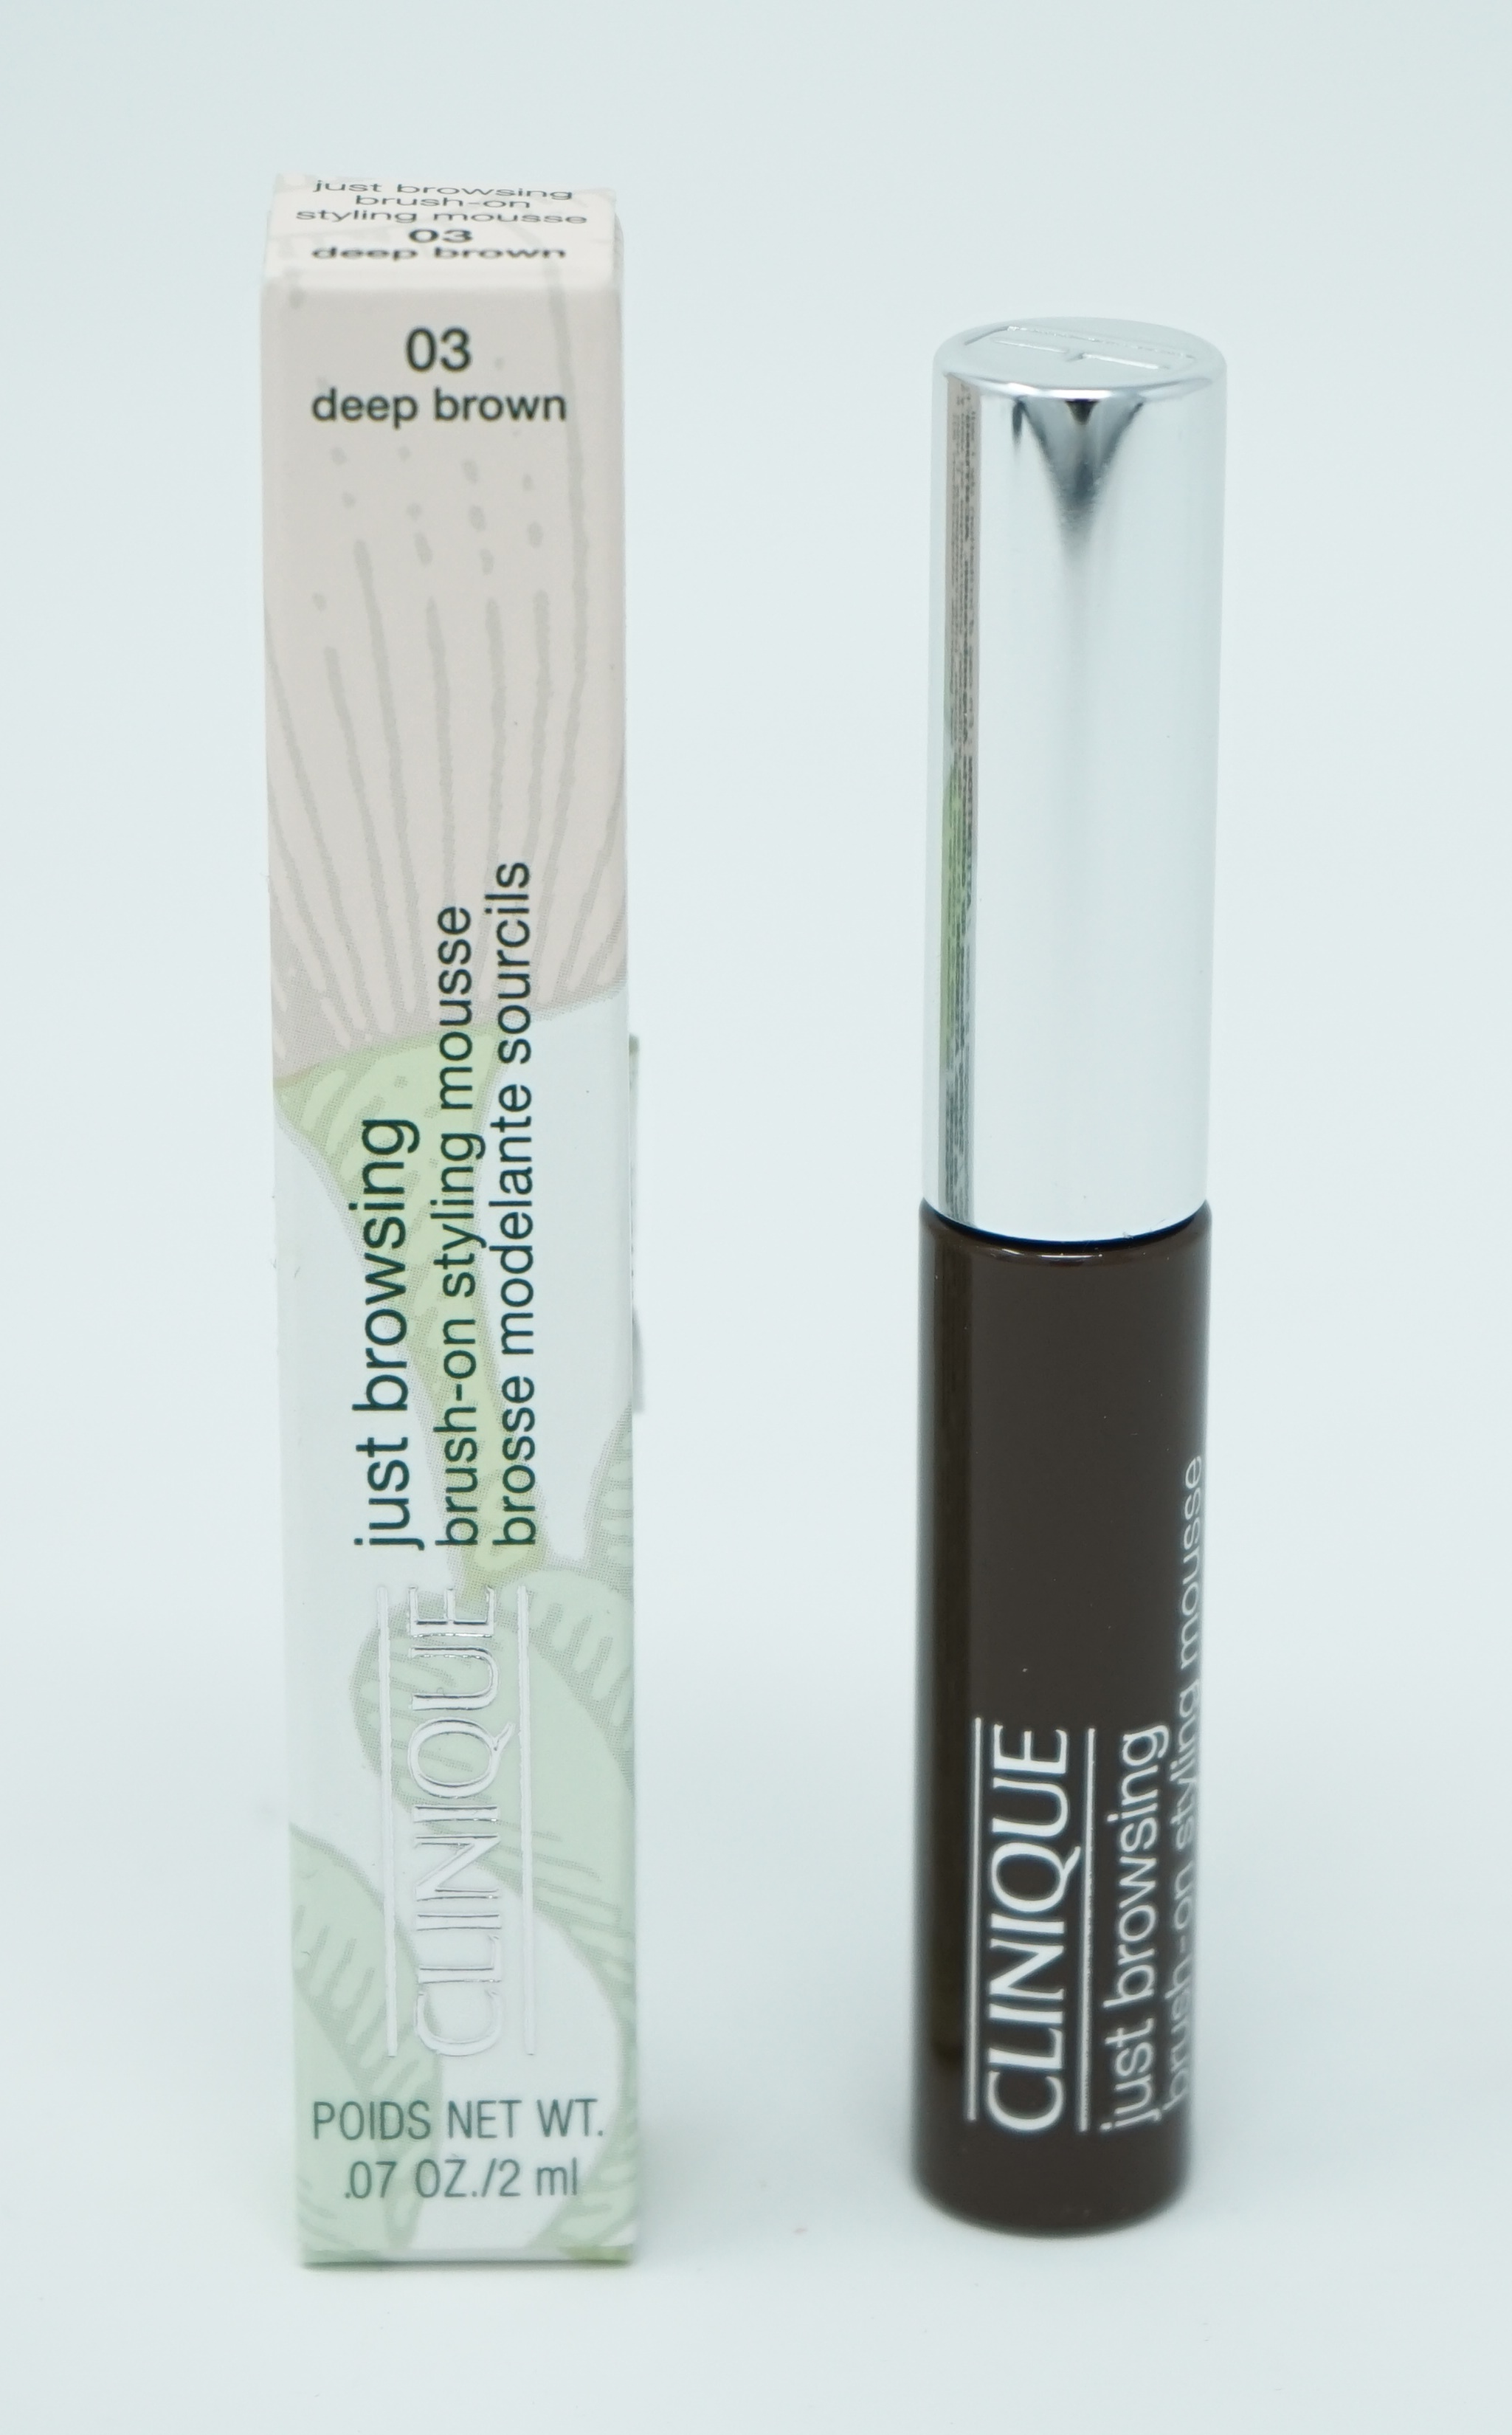 CLINIQUE - JUST BROWSING - 2ml. n° 03 deep brown.